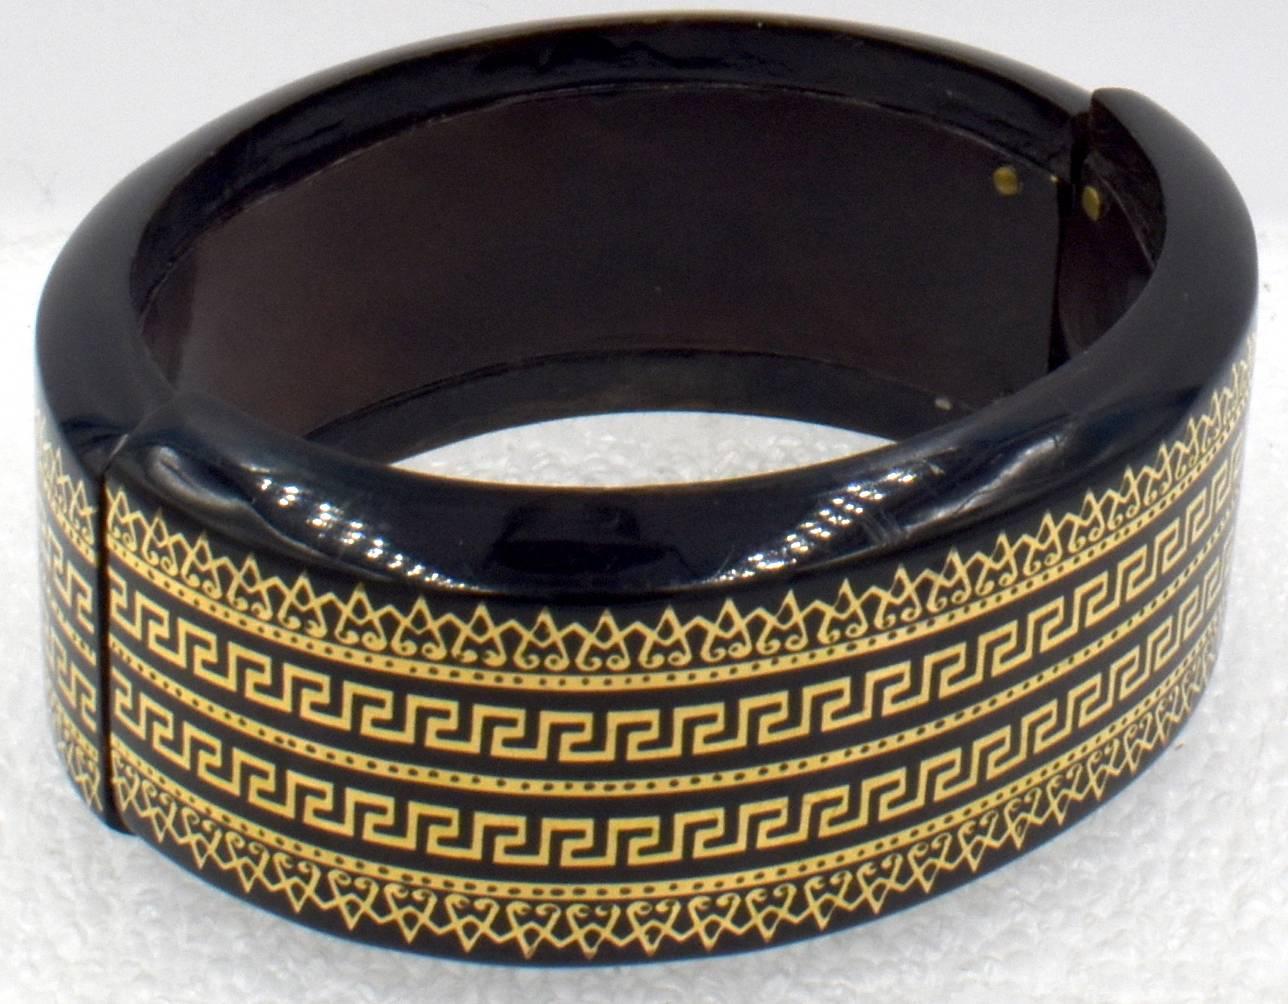 Victorian pique cuff bracelet with a Greek key design. This wonderful bangle expands for easy put on and off. The gold inlay is crisp and smart looking. The bangle measures one inch wide and the interior dimensions are 1 7/8